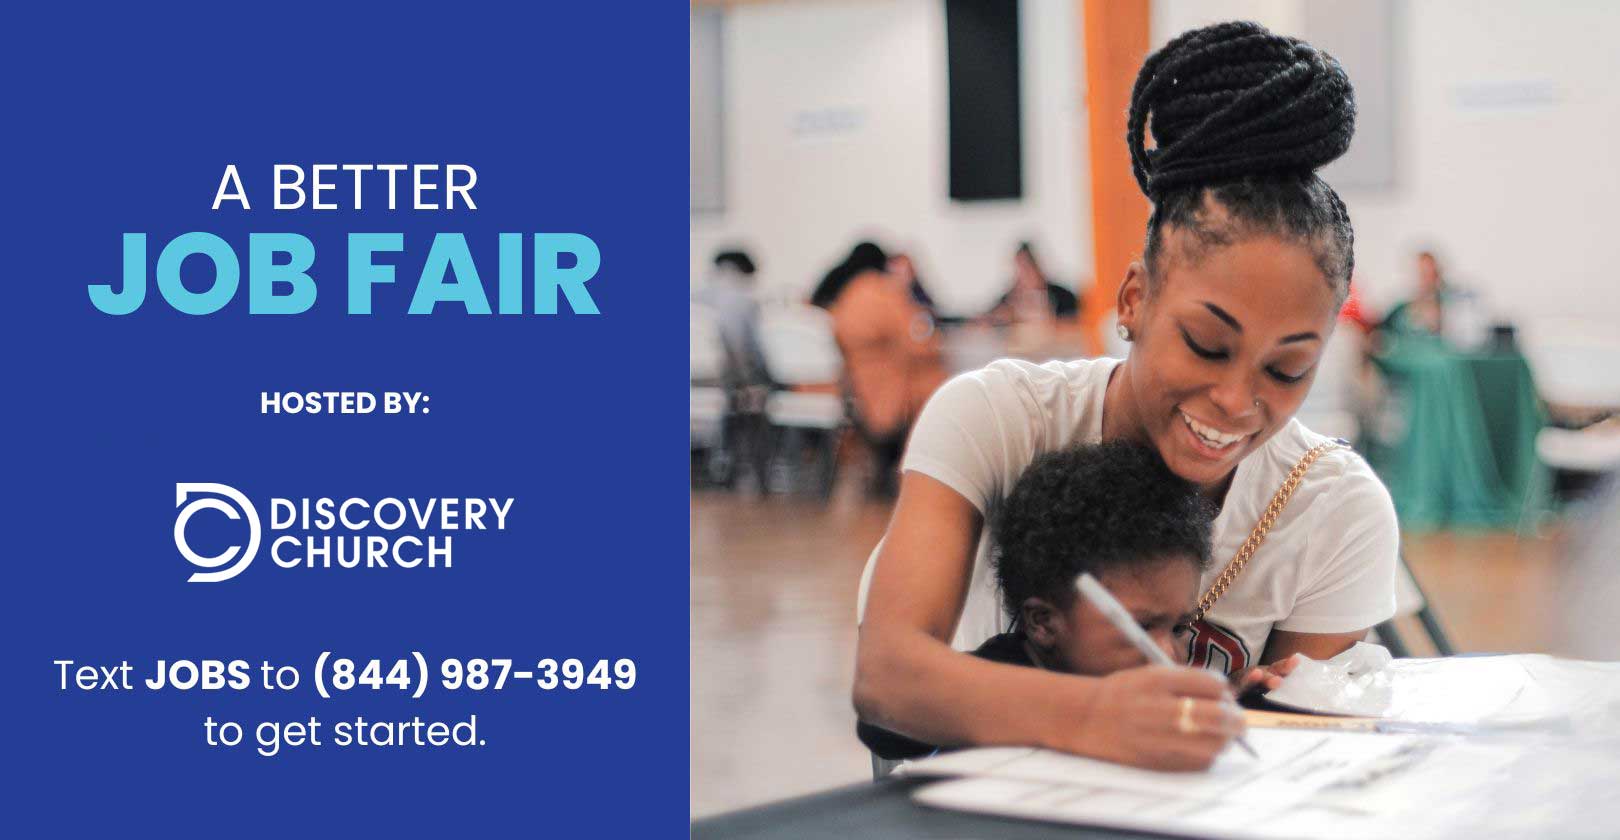 A better job fair hosted by Discovery Church event poster